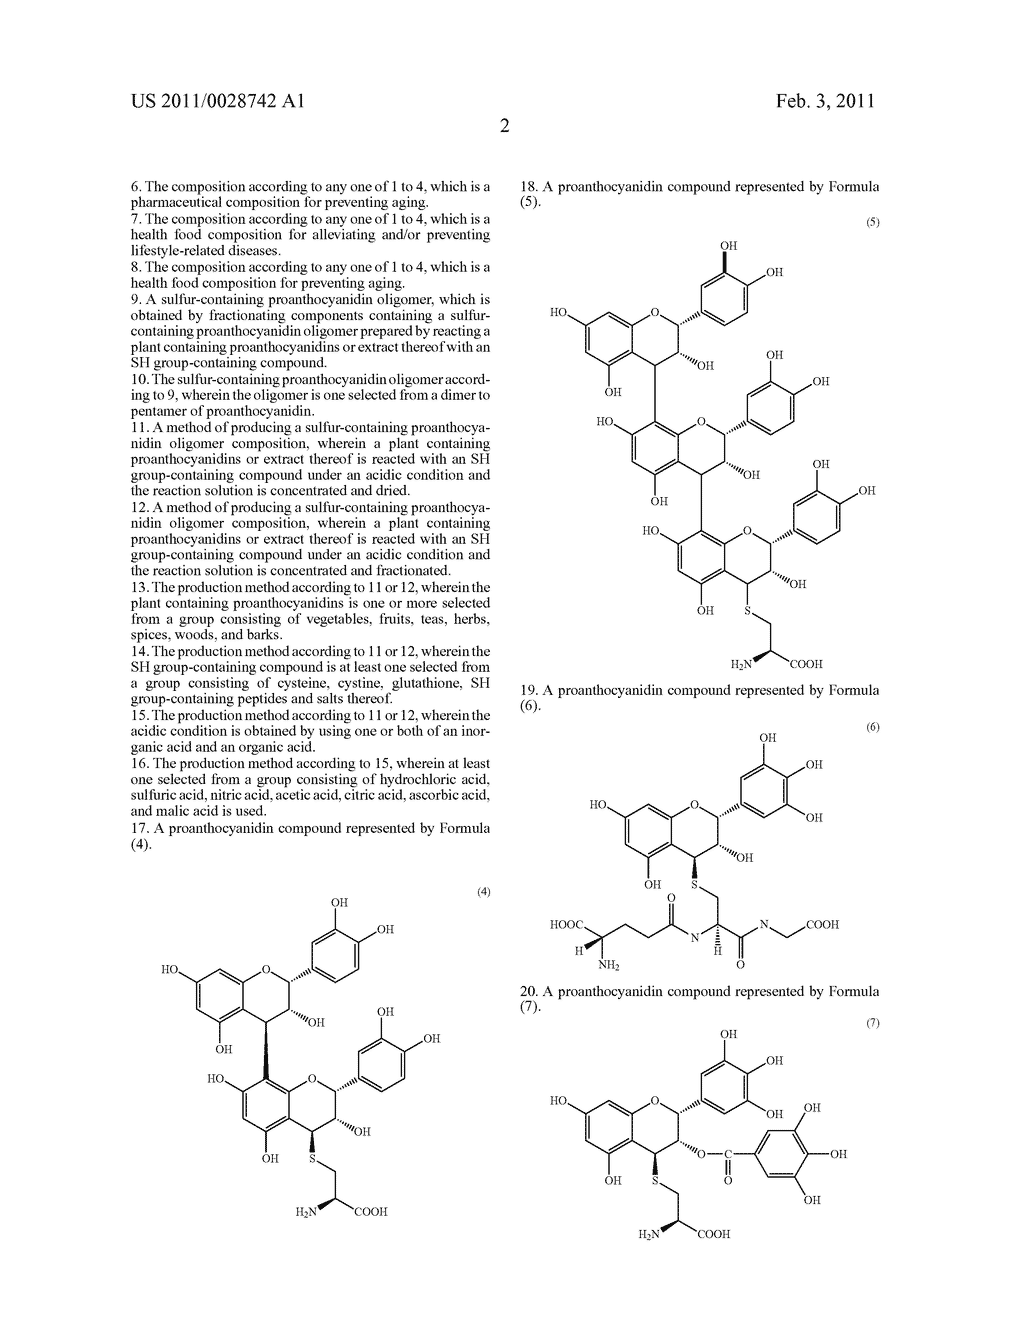 SULFUR-CONTAINING PROANTHOCYANIDIN OLIGOMER COMPOSITION AND PRODUCTION METHOD THEREOF - diagram, schematic, and image 16